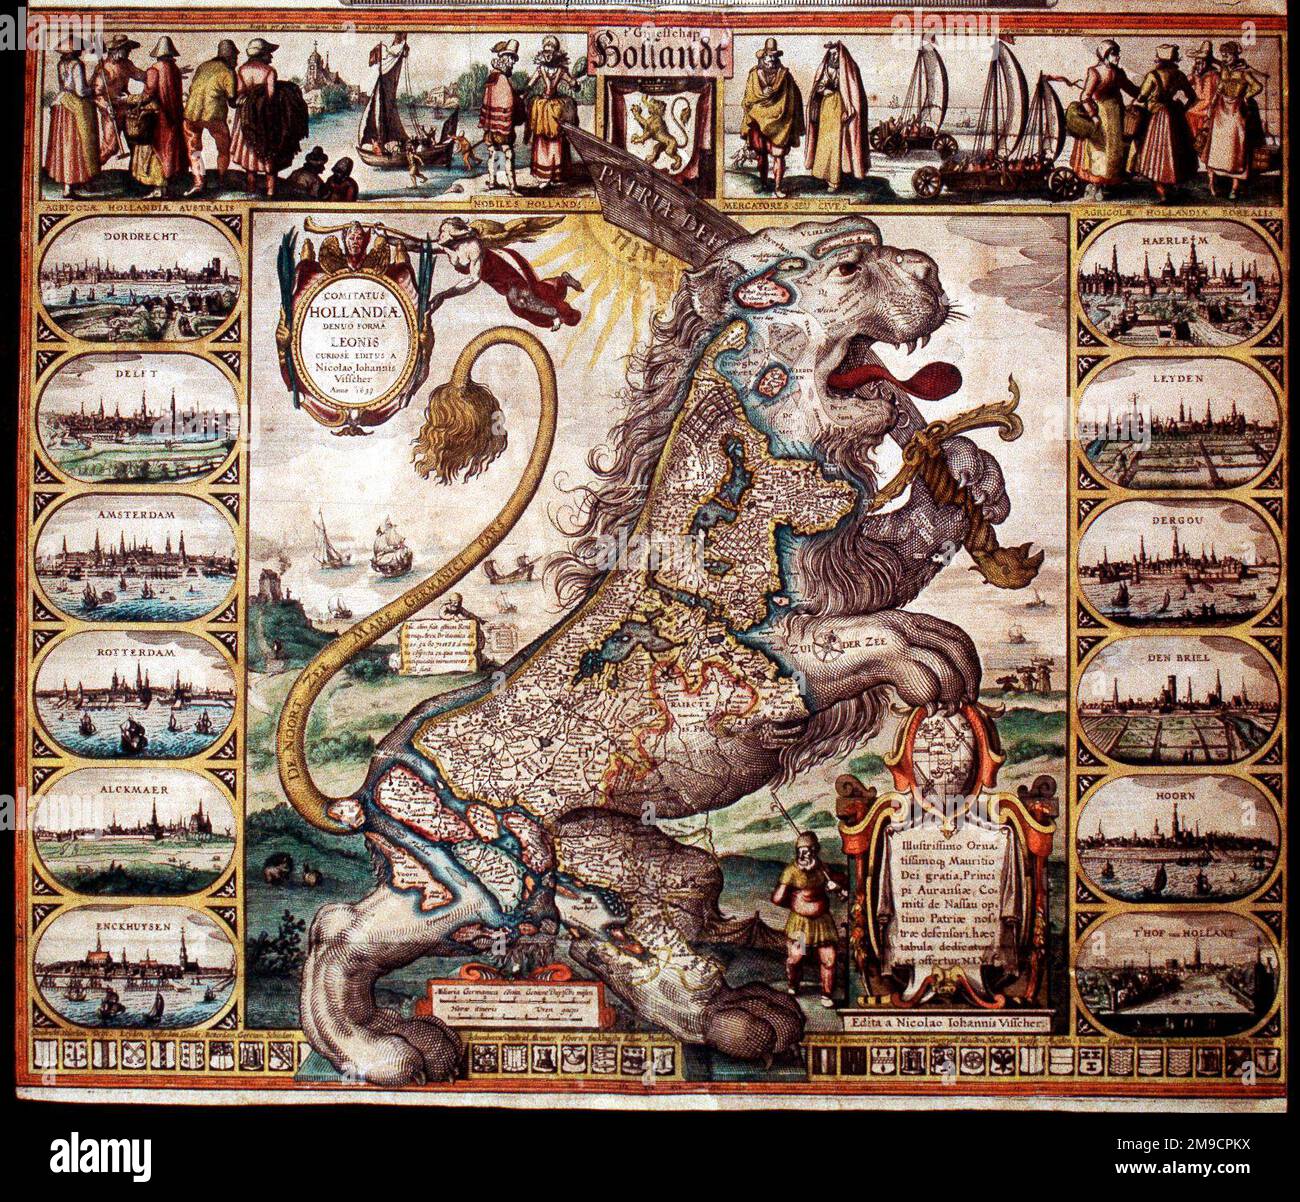 Leo Belgicus showing the Low Countries of Netherlands, Belgium and Luxembourg as a Lion during the Eighty Years War of Independence Stock Photo